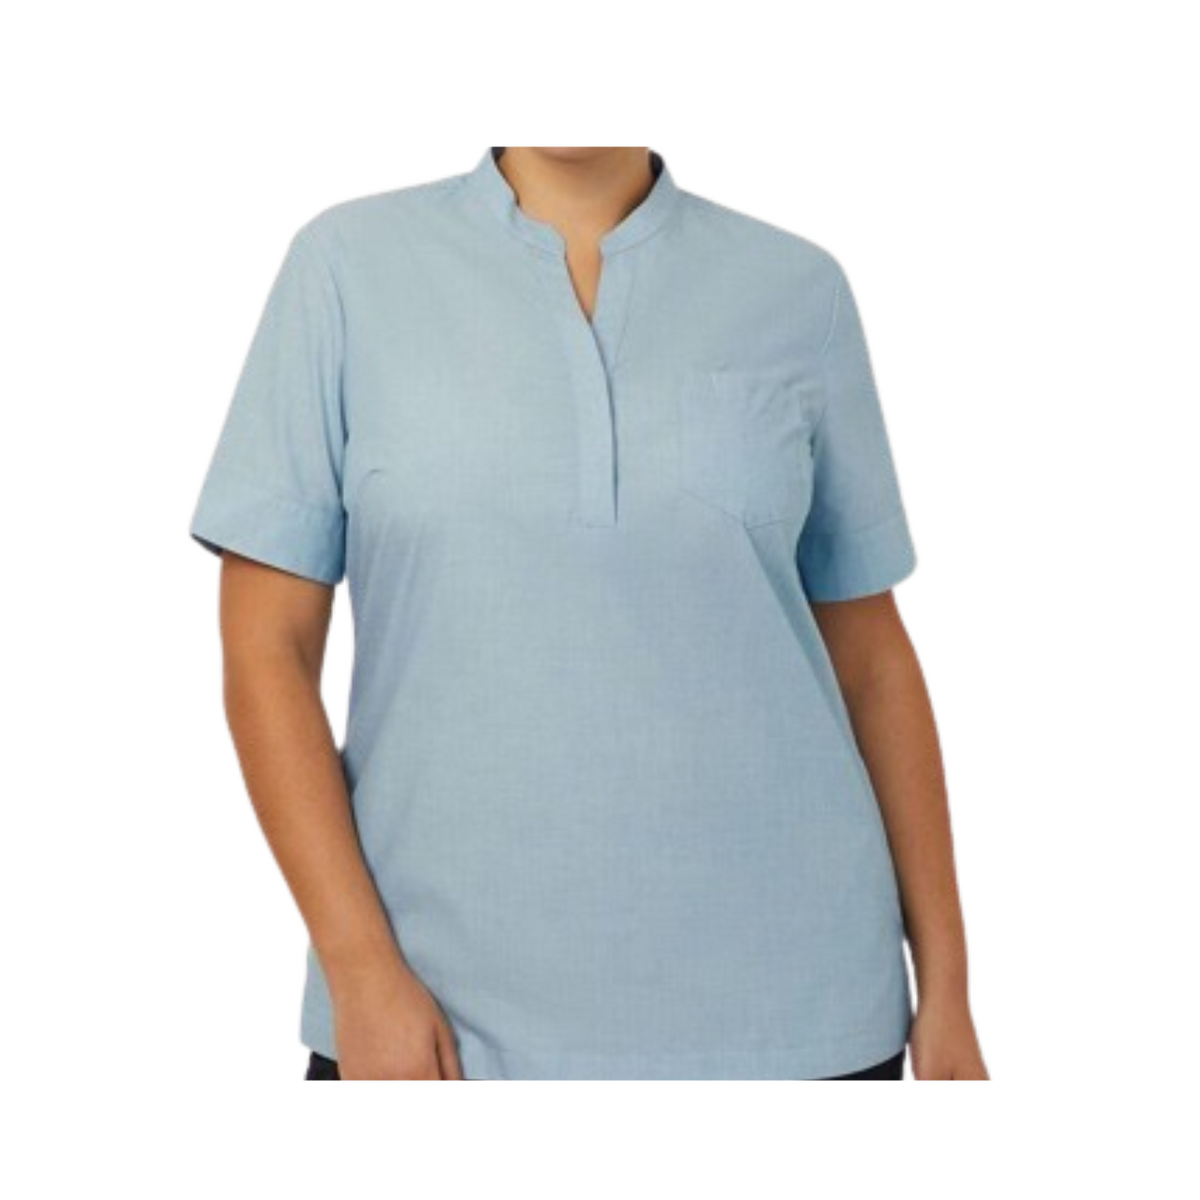 Clearance! NNT Collar Workwear Pockets Comfy Durable Corporate Top Polo CATUGA-Collins Clothing Co